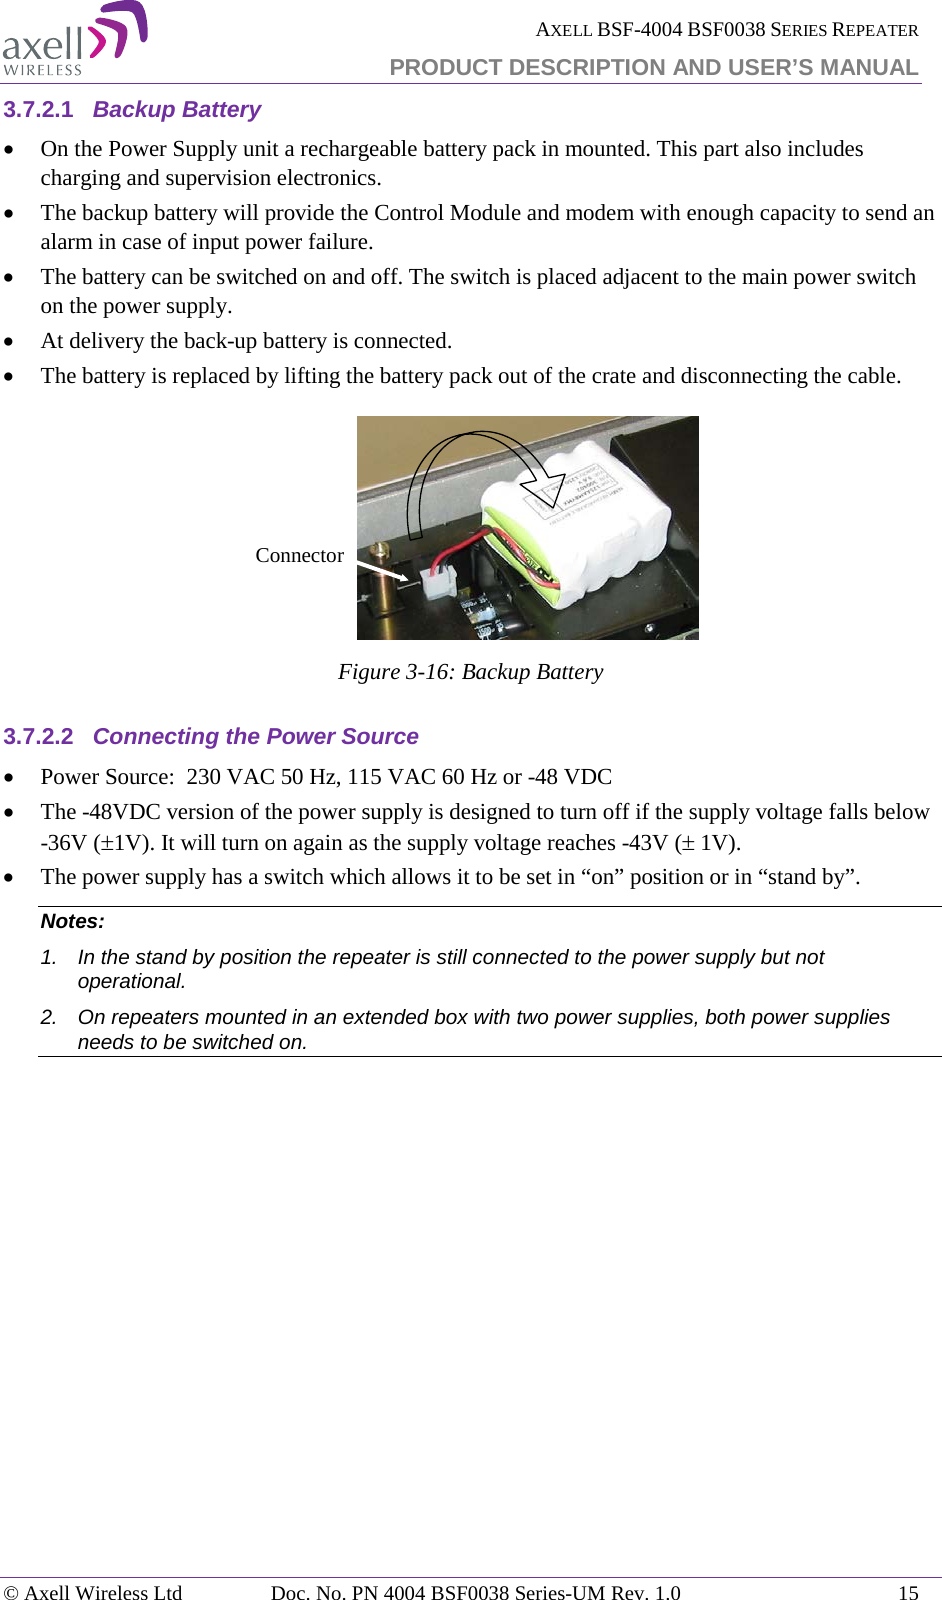  AXELL BSF-4004 BSF0038 SERIES REPEATER PRODUCT DESCRIPTION AND USER’S MANUAL  3.7.2.1 Backup Battery • On the Power Supply unit a rechargeable battery pack in mounted. This part also includes charging and supervision electronics.  • The backup battery will provide the Control Module and modem with enough capacity to send an alarm in case of input power failure.  • The battery can be switched on and off. The switch is placed adjacent to the main power switch on the power supply. • At delivery the back-up battery is connected.  • The battery is replaced by lifting the battery pack out of the crate and disconnecting the cable.  Figure  3-16: Backup Battery 3.7.2.2 Connecting the Power Source • Power Source:  230 VAC 50 Hz, 115 VAC 60 Hz or -48 VDC  • The -48VDC version of the power supply is designed to turn off if the supply voltage falls below -36V (±1V). It will turn on again as the supply voltage reaches -43V (± 1V).  • The power supply has a switch which allows it to be set in “on” position or in “stand by”. Notes:  1. In the stand by position the repeater is still connected to the power supply but not operational. 2. On repeaters mounted in an extended box with two power supplies, both power supplies needs to be switched on.   Connector© Axell Wireless Ltd Doc. No. PN 4004 BSF0038 Series-UM Rev. 1.0 15 